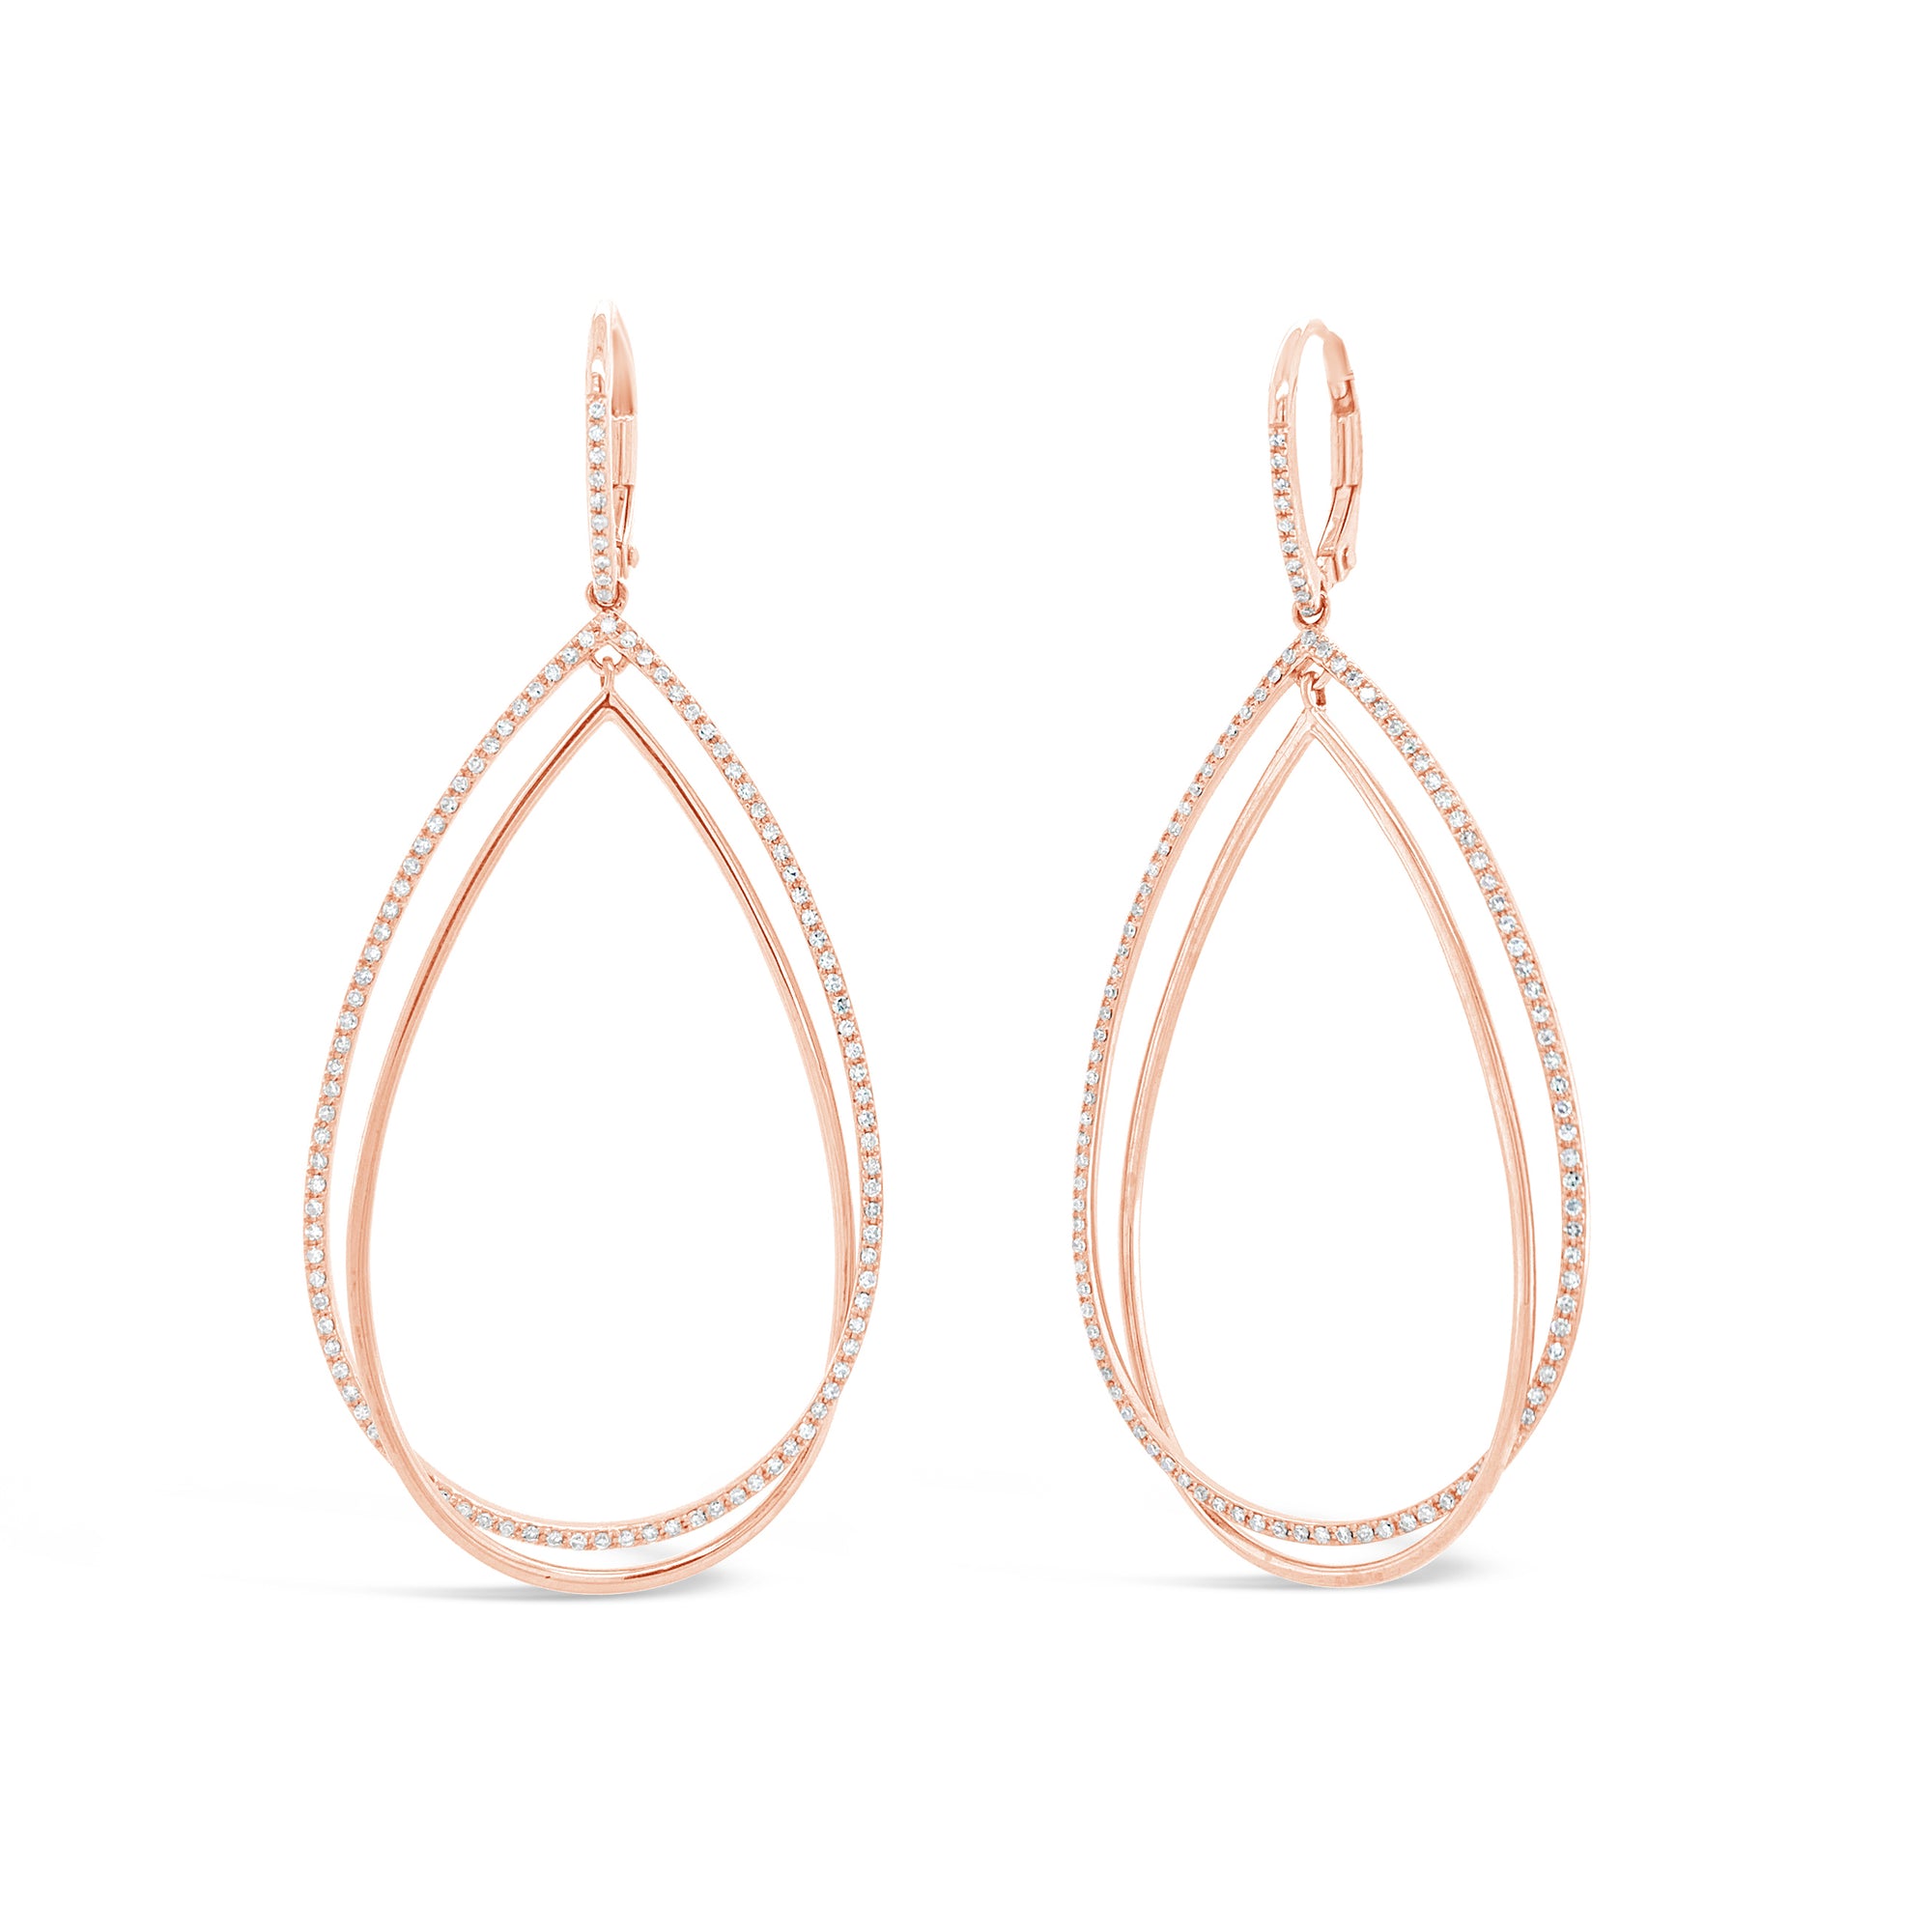 Diamond & Gold Double Teardrop Cocktail Earrings  -14k gold weighing 6.71 grams  -214 round diamonds totaling 0.61 carats 